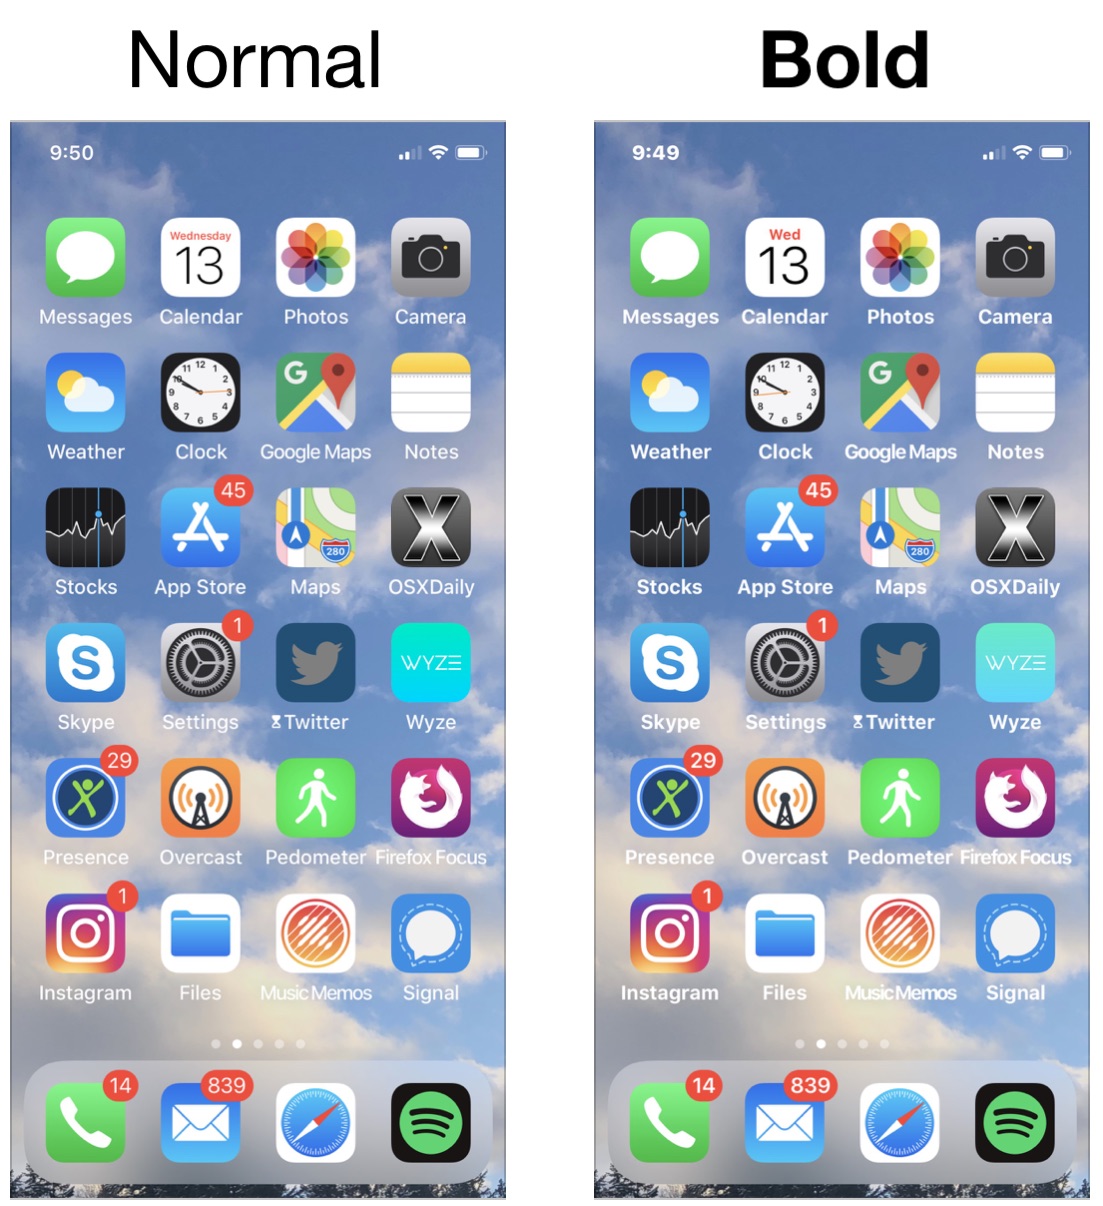 How to Enable Bold Text on iPhone or iPad